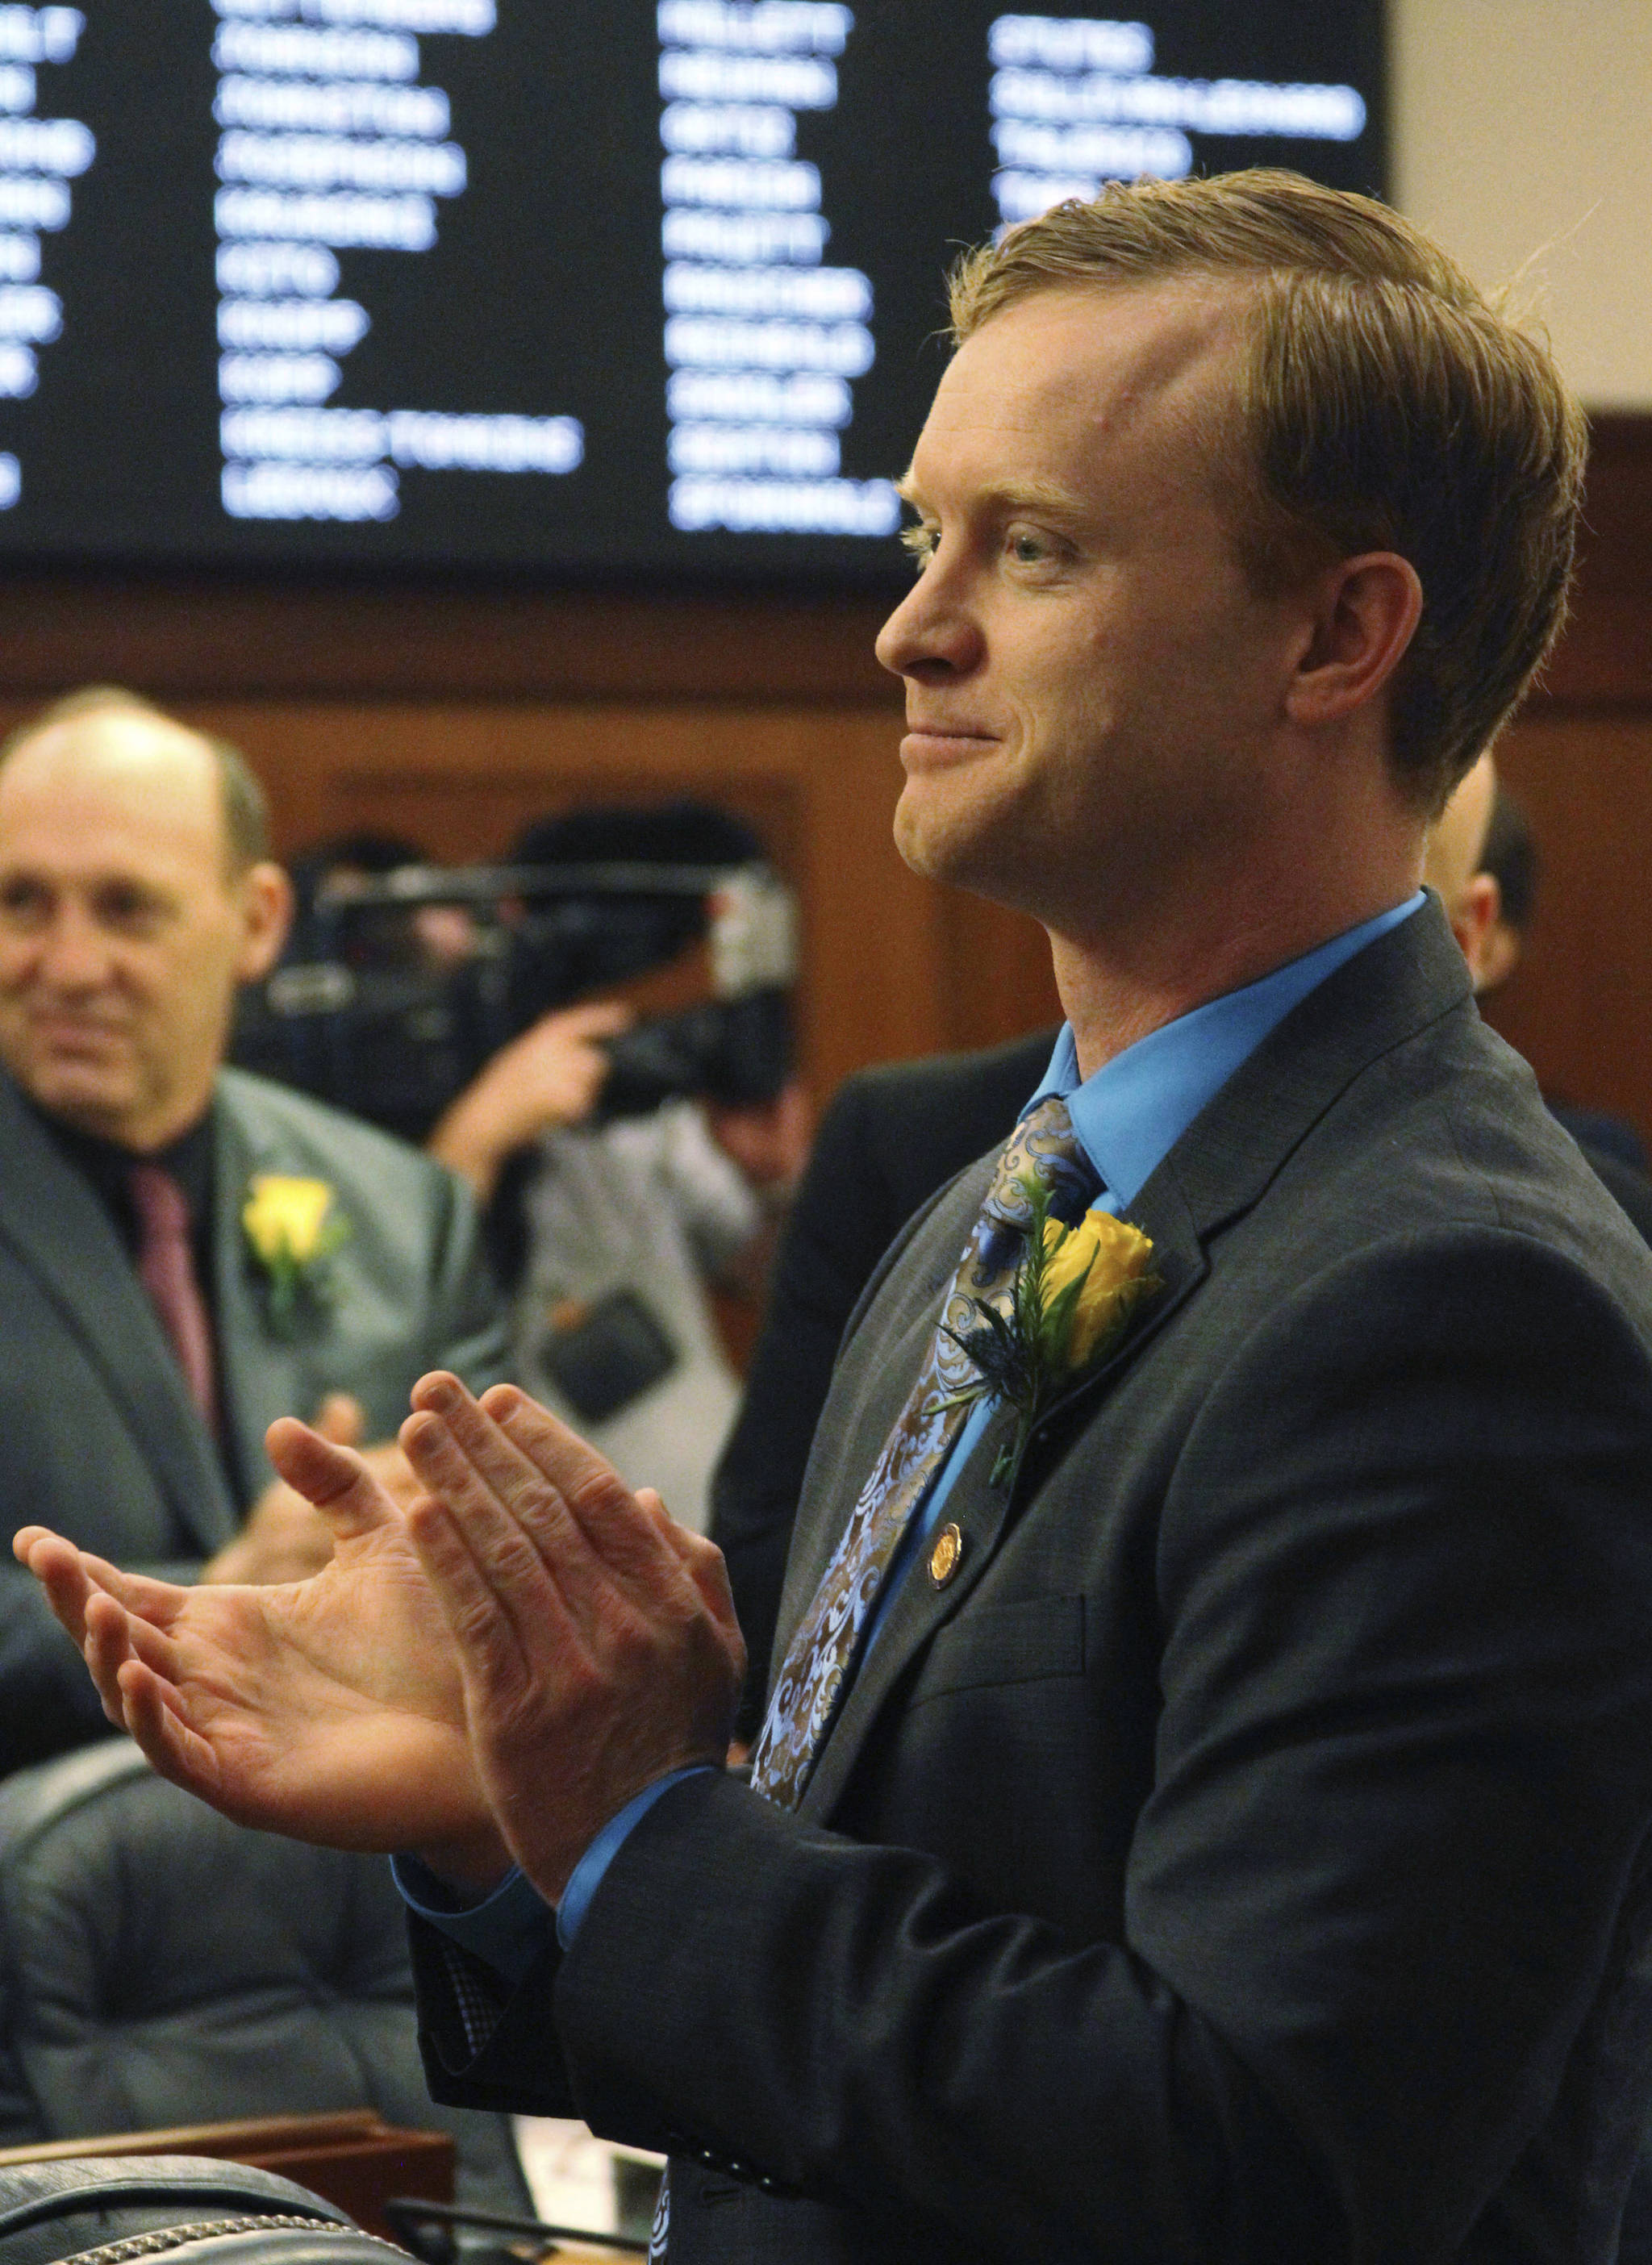 State Rep. David Eastman, a Republican freshman from Wasilla, is seen during the introduction of the newly-elected house speaker at the Alaska Legislature in Juneau on Jan. 17, 2017. (Mark Thiessen | The Associated Press File)